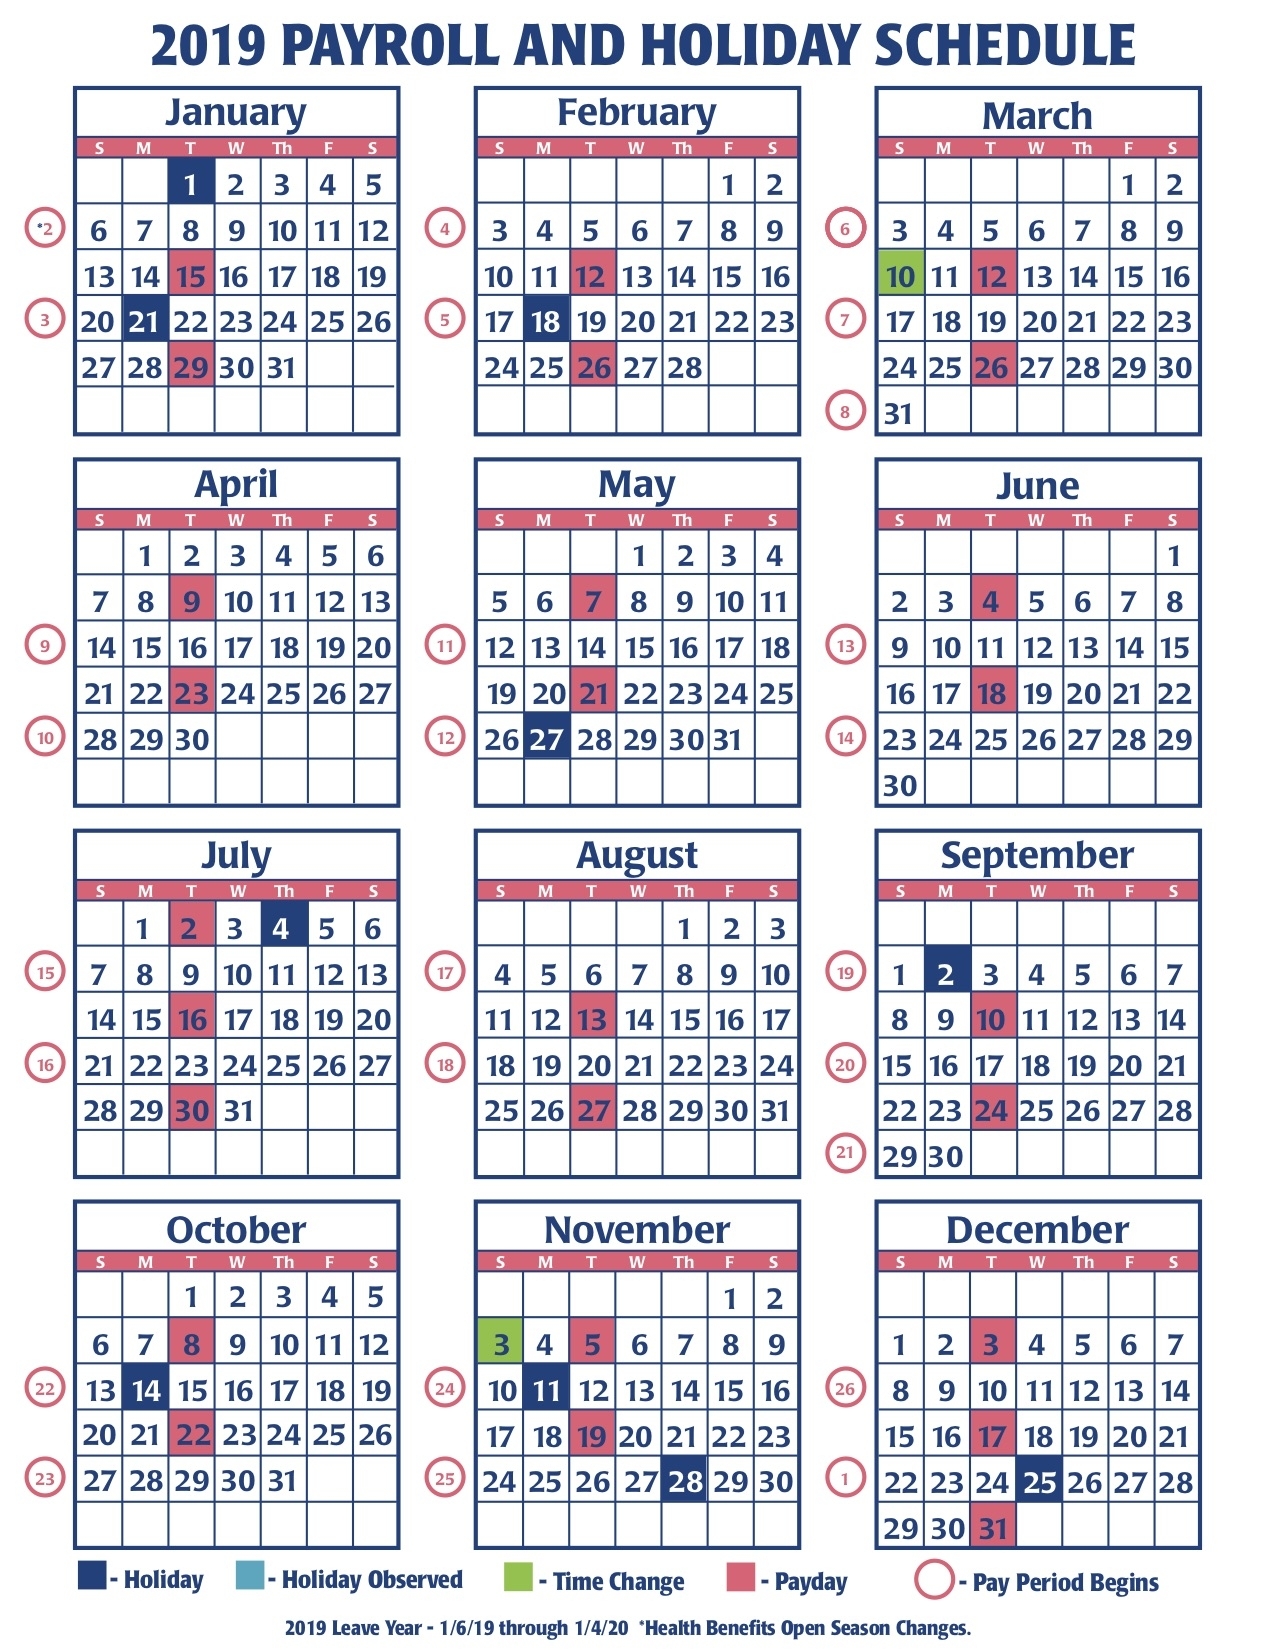 2019 Faa Payroll Calendar | Faa Managers Association pertaining to 2020 Federal Calendar With Pay Periods